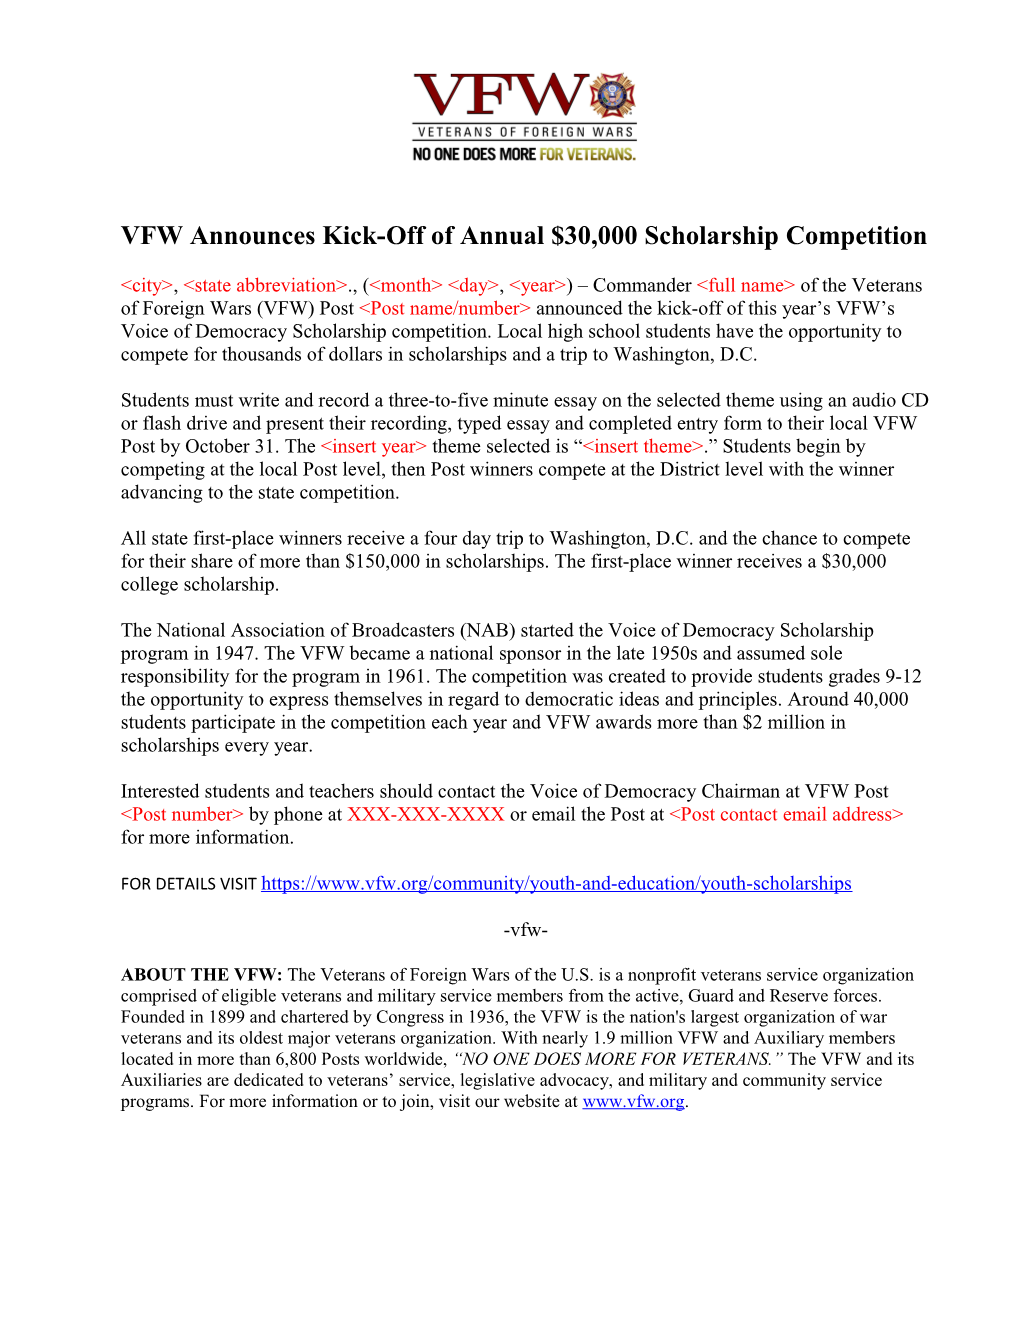 VFW Announces Kick-Off of Annual $30,000 Scholarship Competition